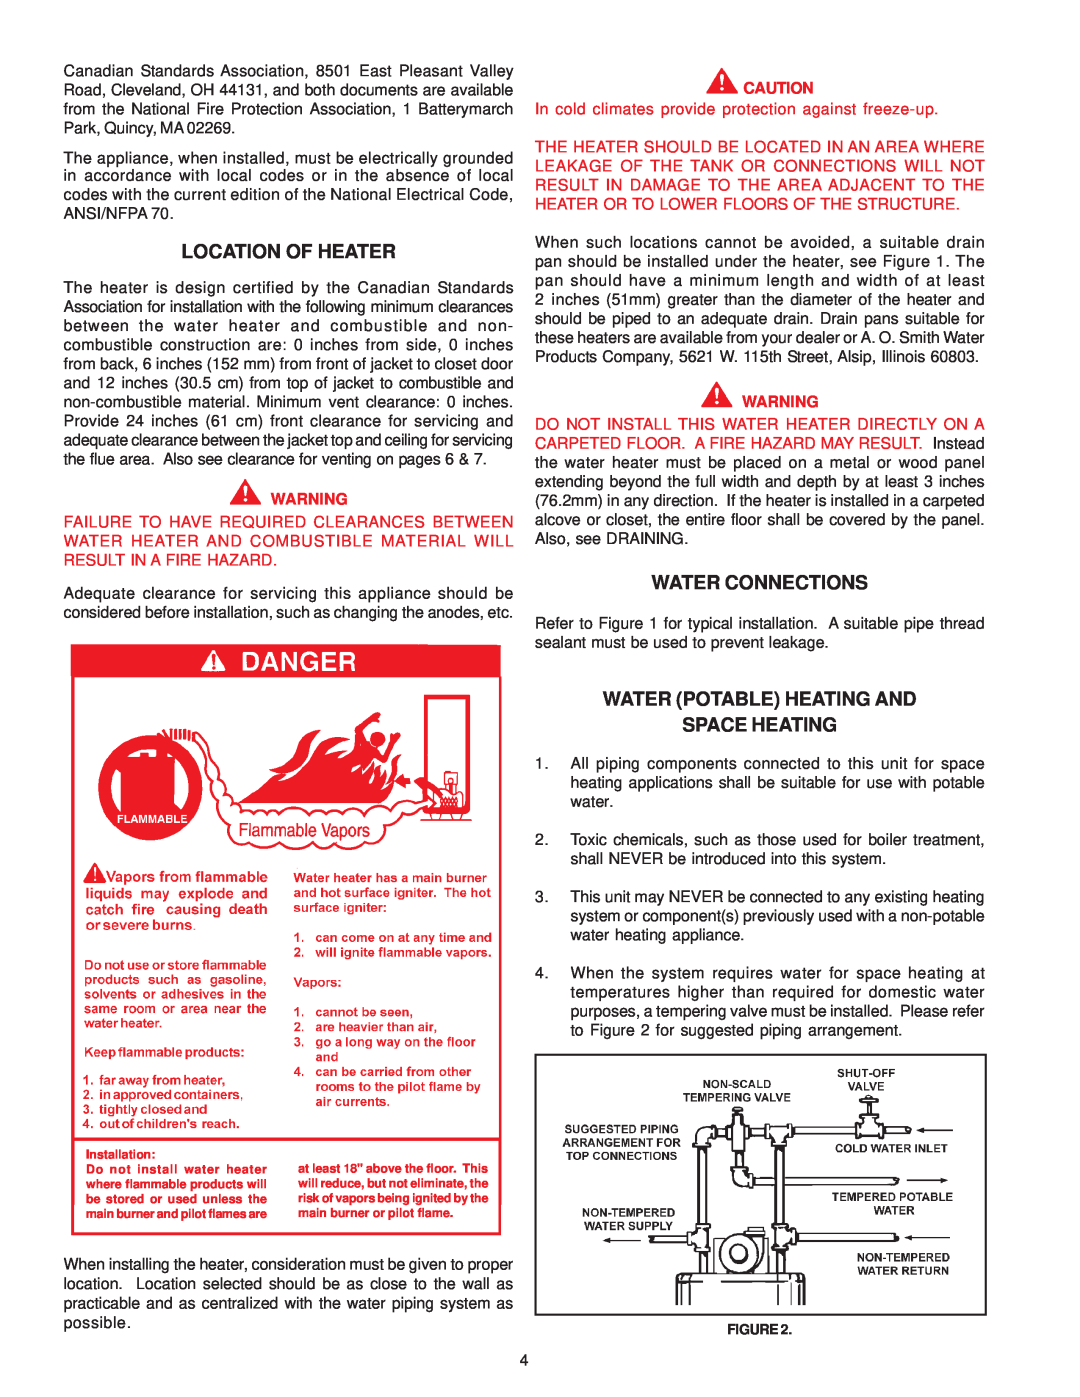 A.O. Smith GPDH, GPDX, GPDT owner manual Location Of Heater, Water Connections, Water Potable Heating And Space Heating 